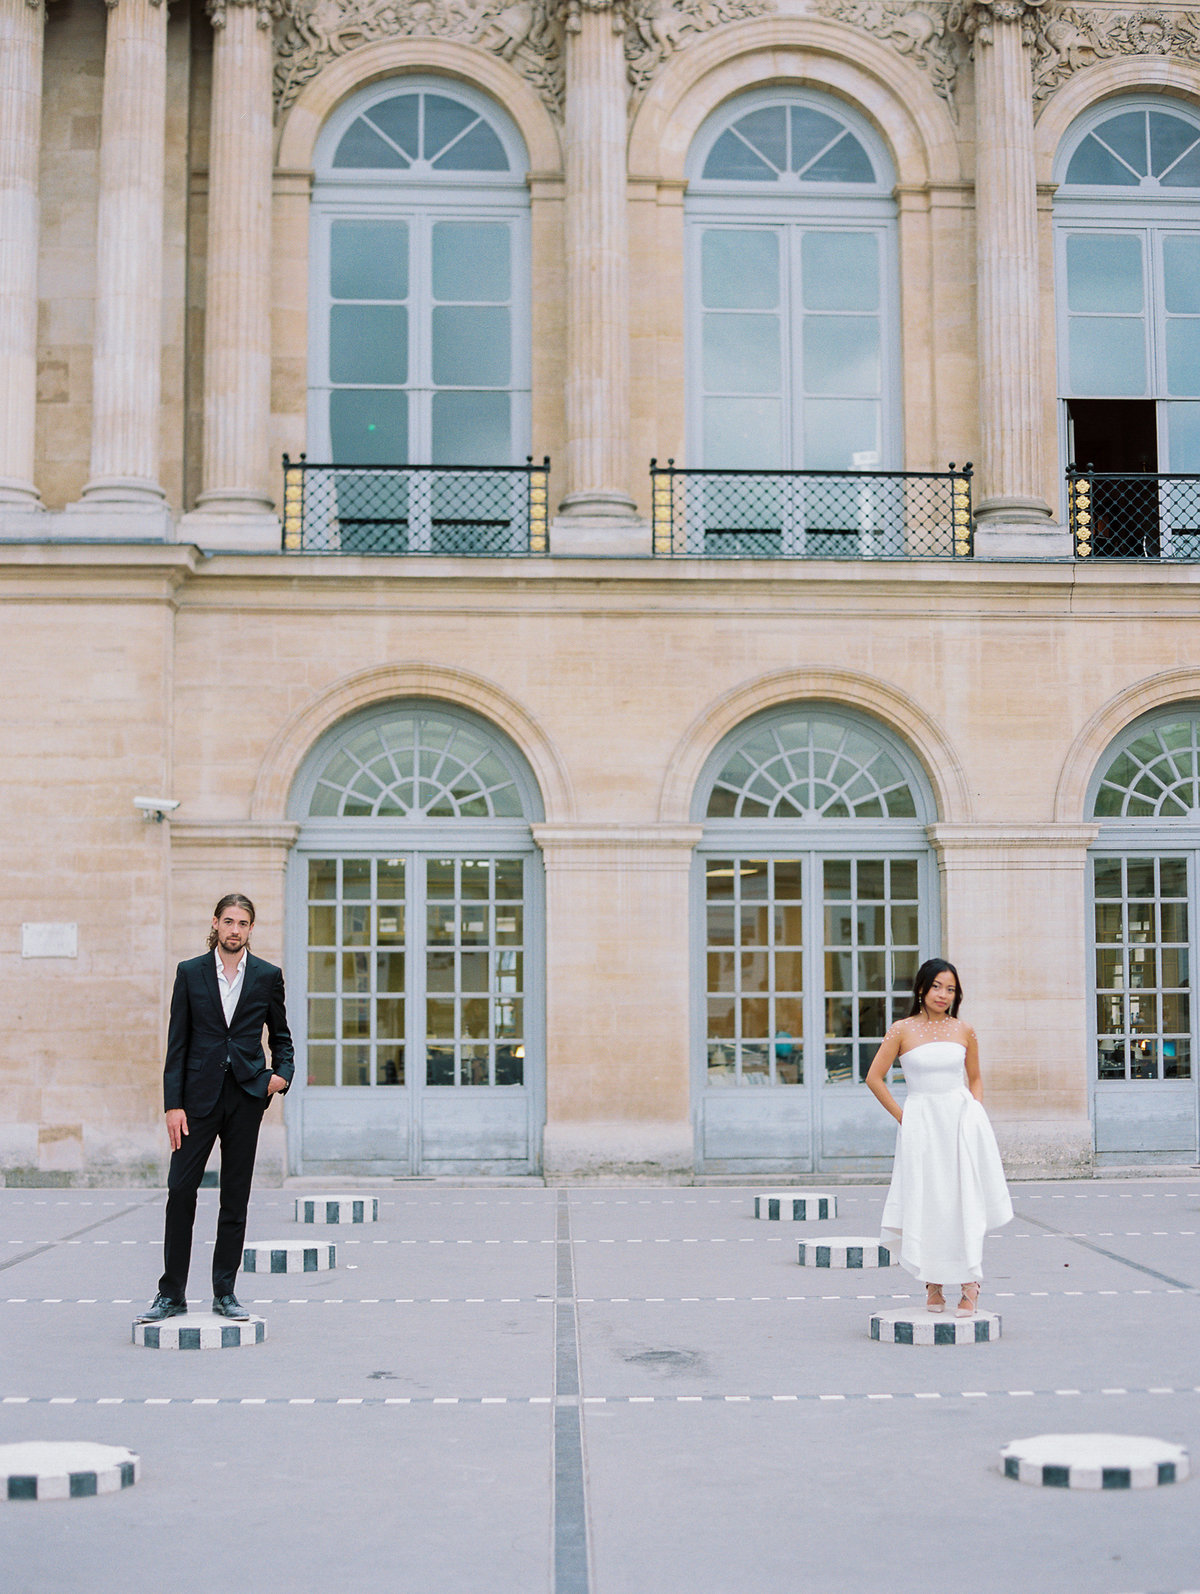 couple staning apart on back and white pillars. bride with short midid dress and groom with black suit